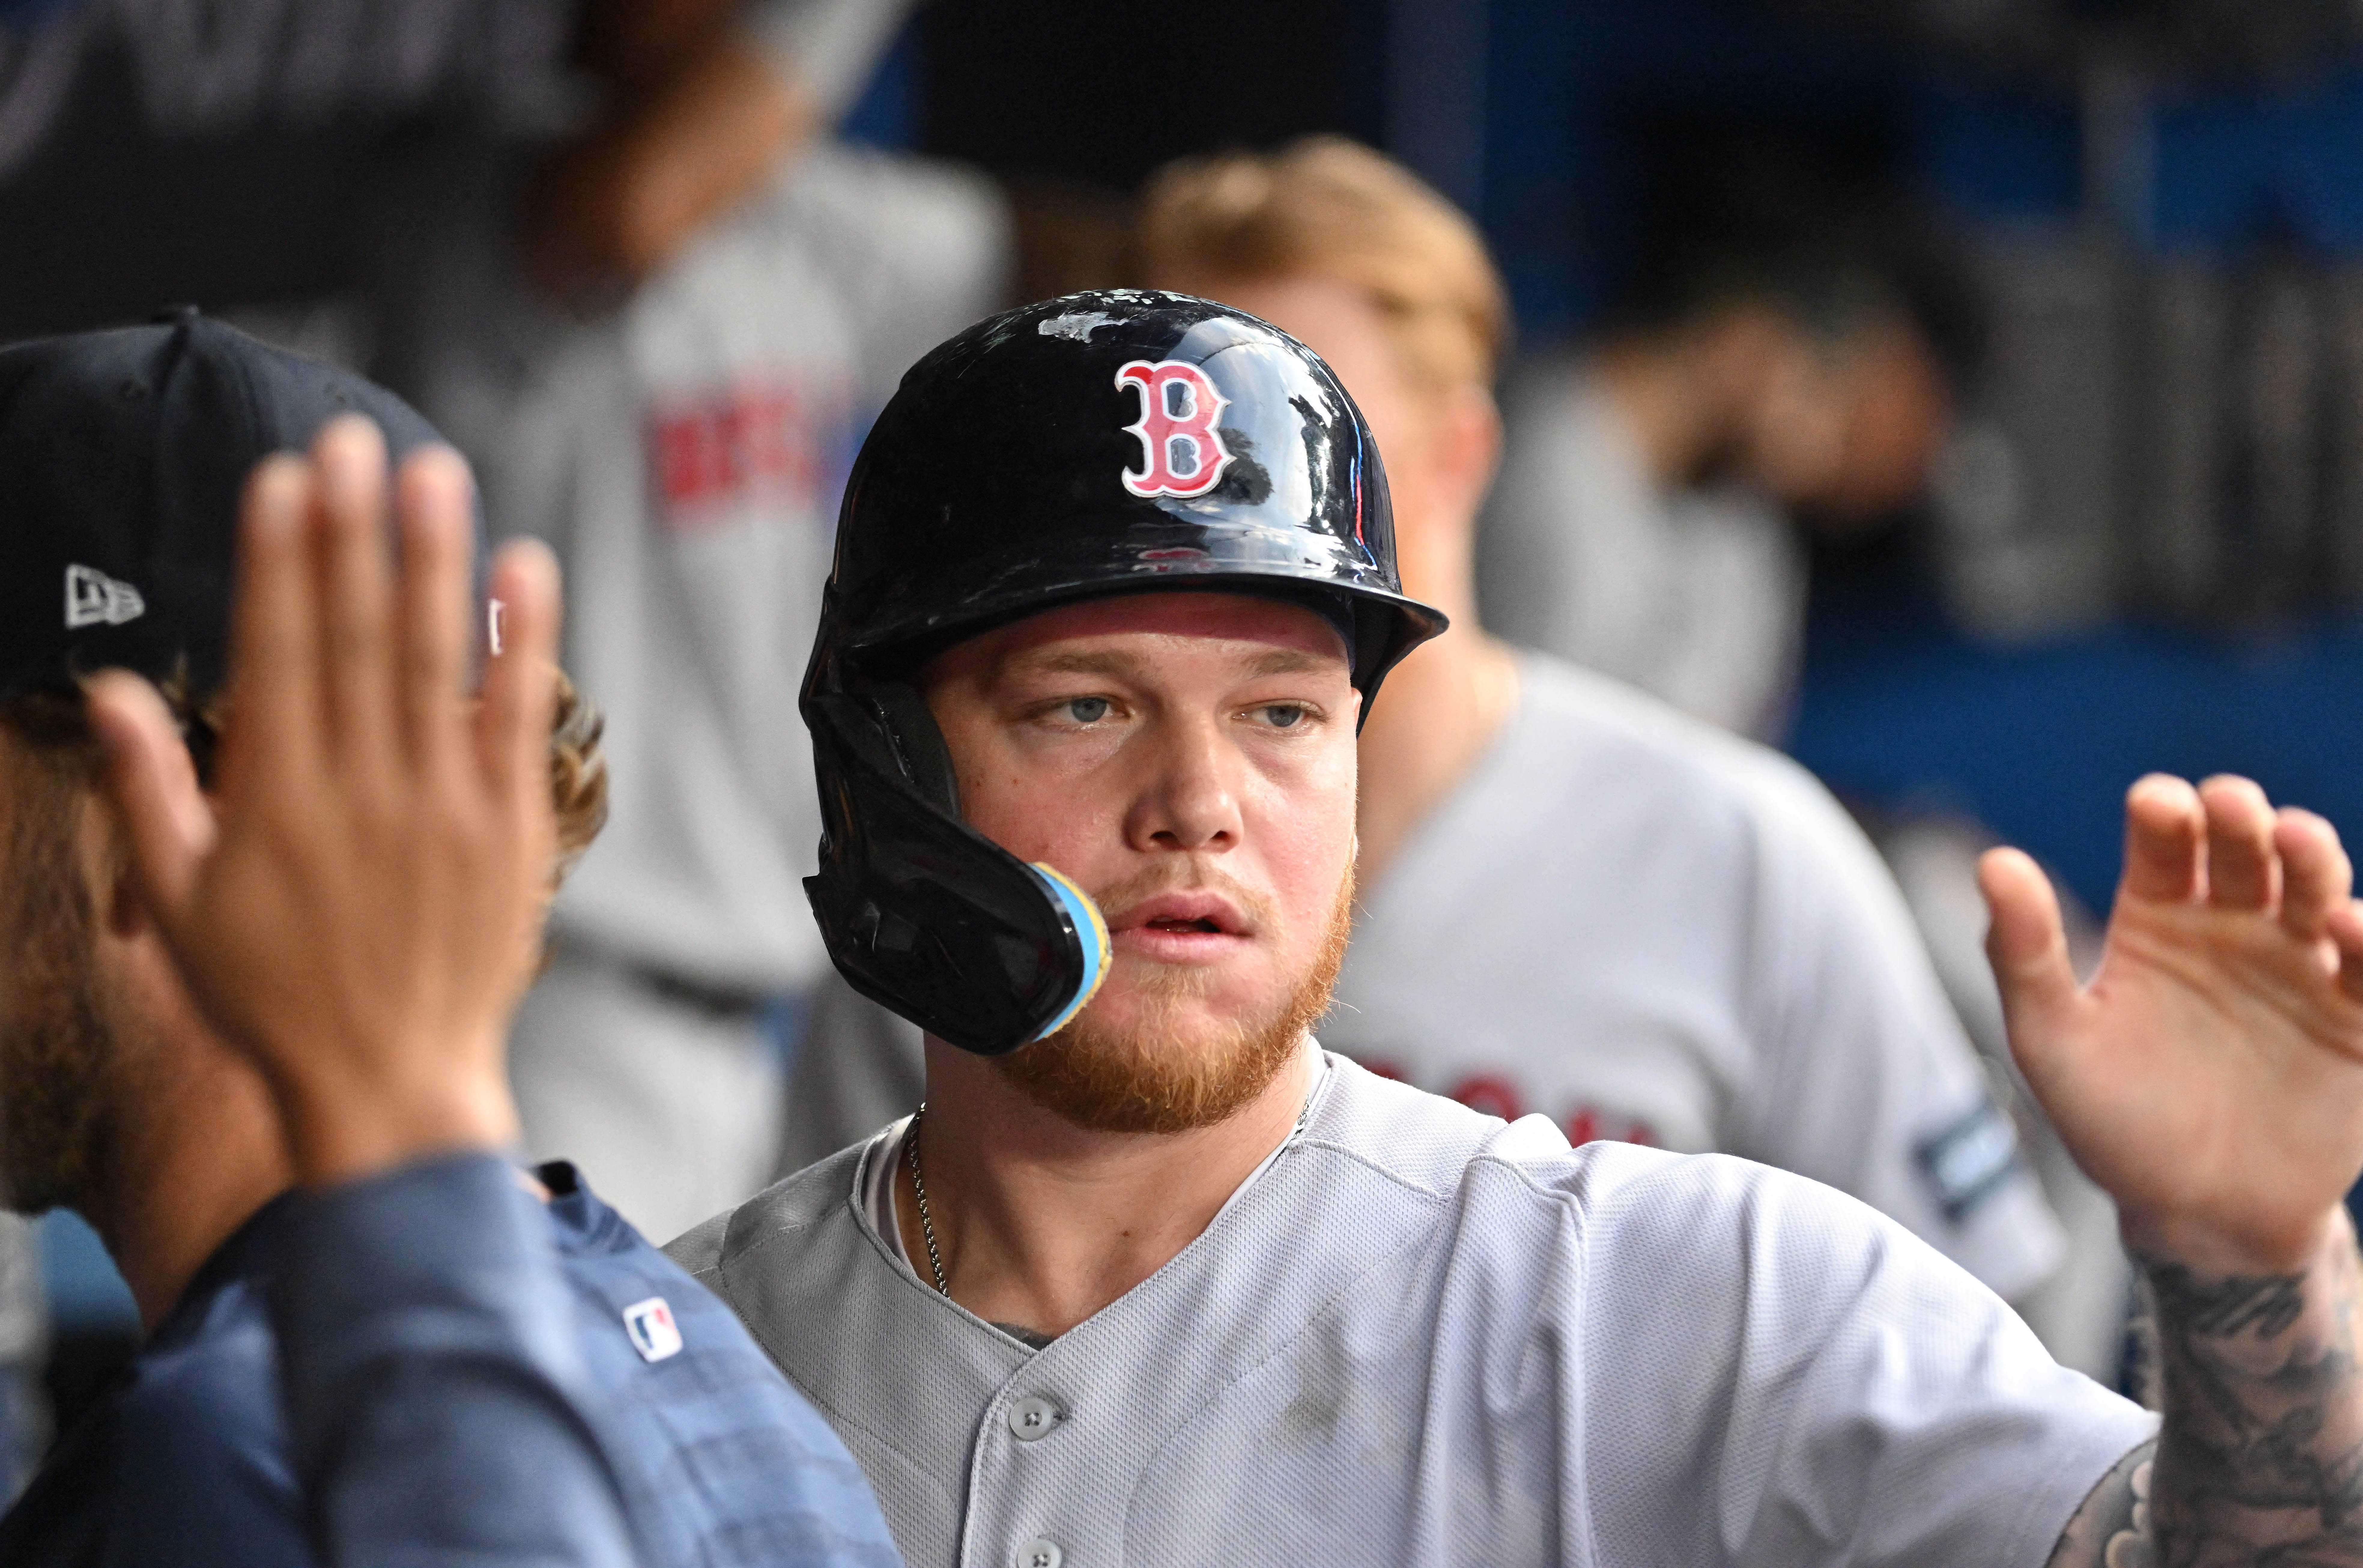 Moving on: Red Sox thump, eliminate Yanks